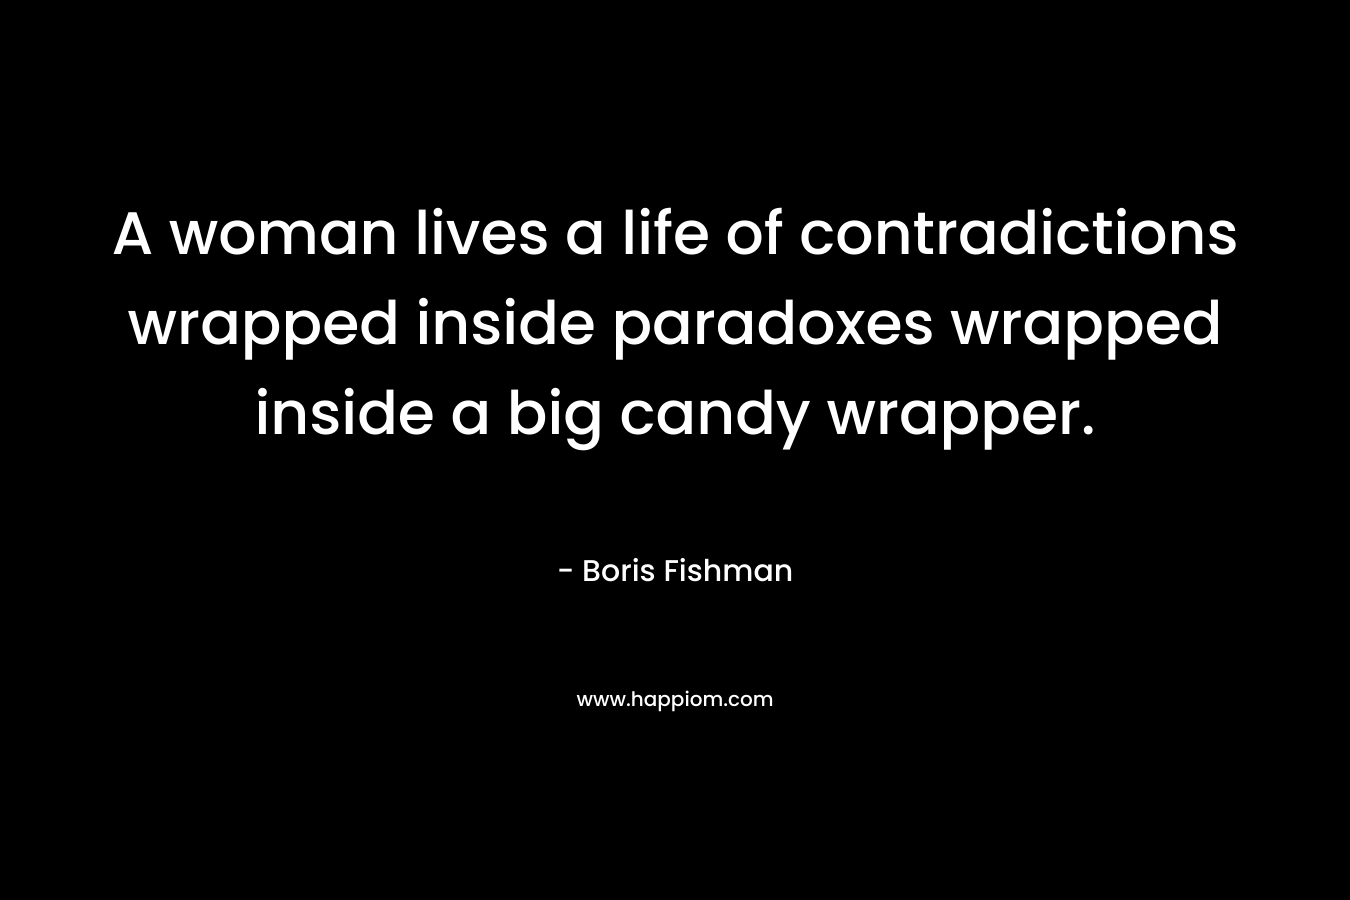 A woman lives a life of contradictions wrapped inside paradoxes wrapped inside a big candy wrapper.